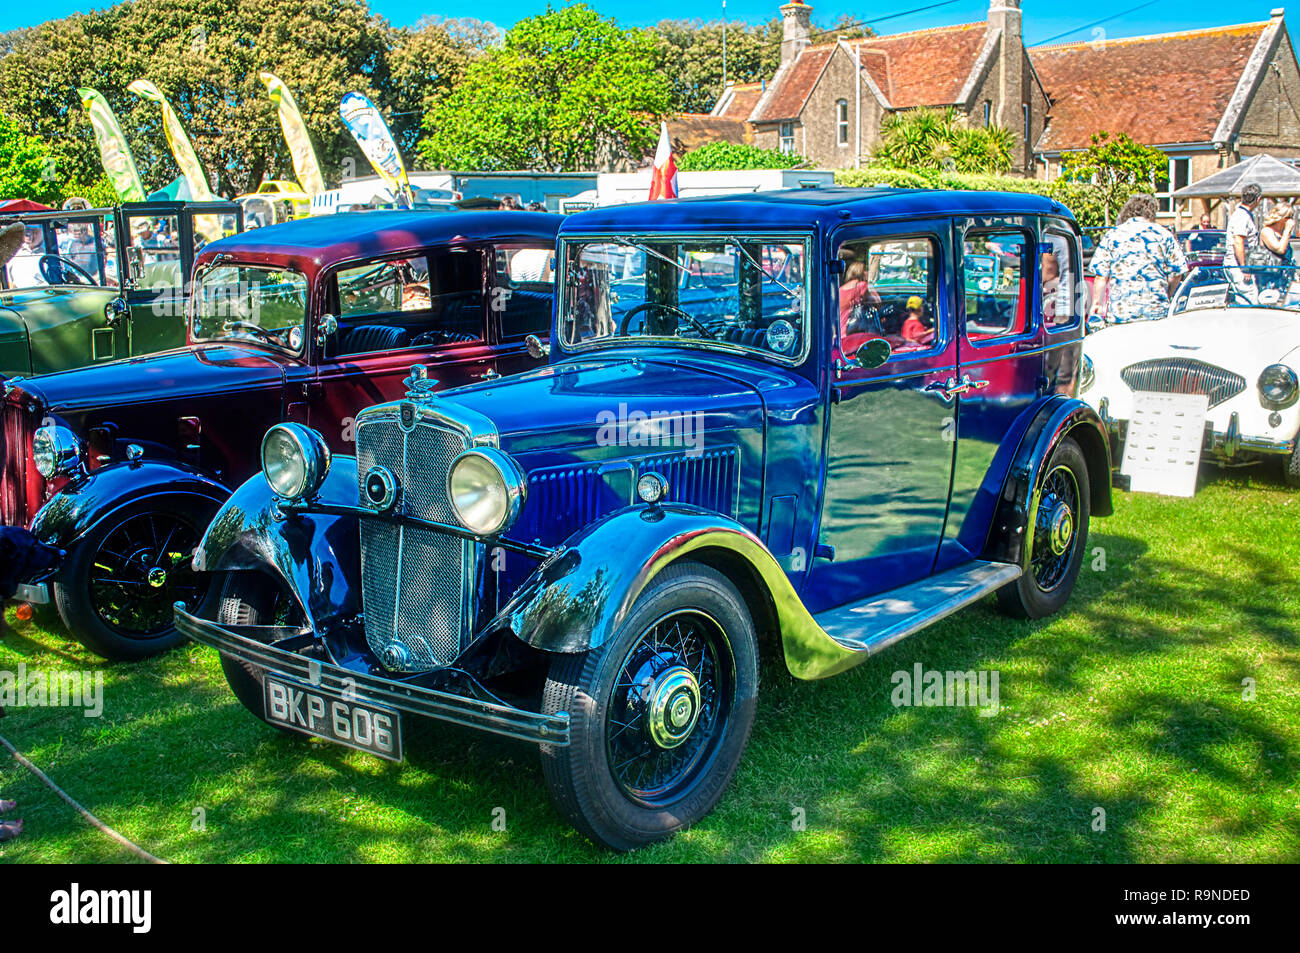 Morris Ten Four 1935 vintage car reg. no. BKP 606 on display in classic car show at Old Gaffer's Festival, Yarmouth, Isle of Wight Stock Photo